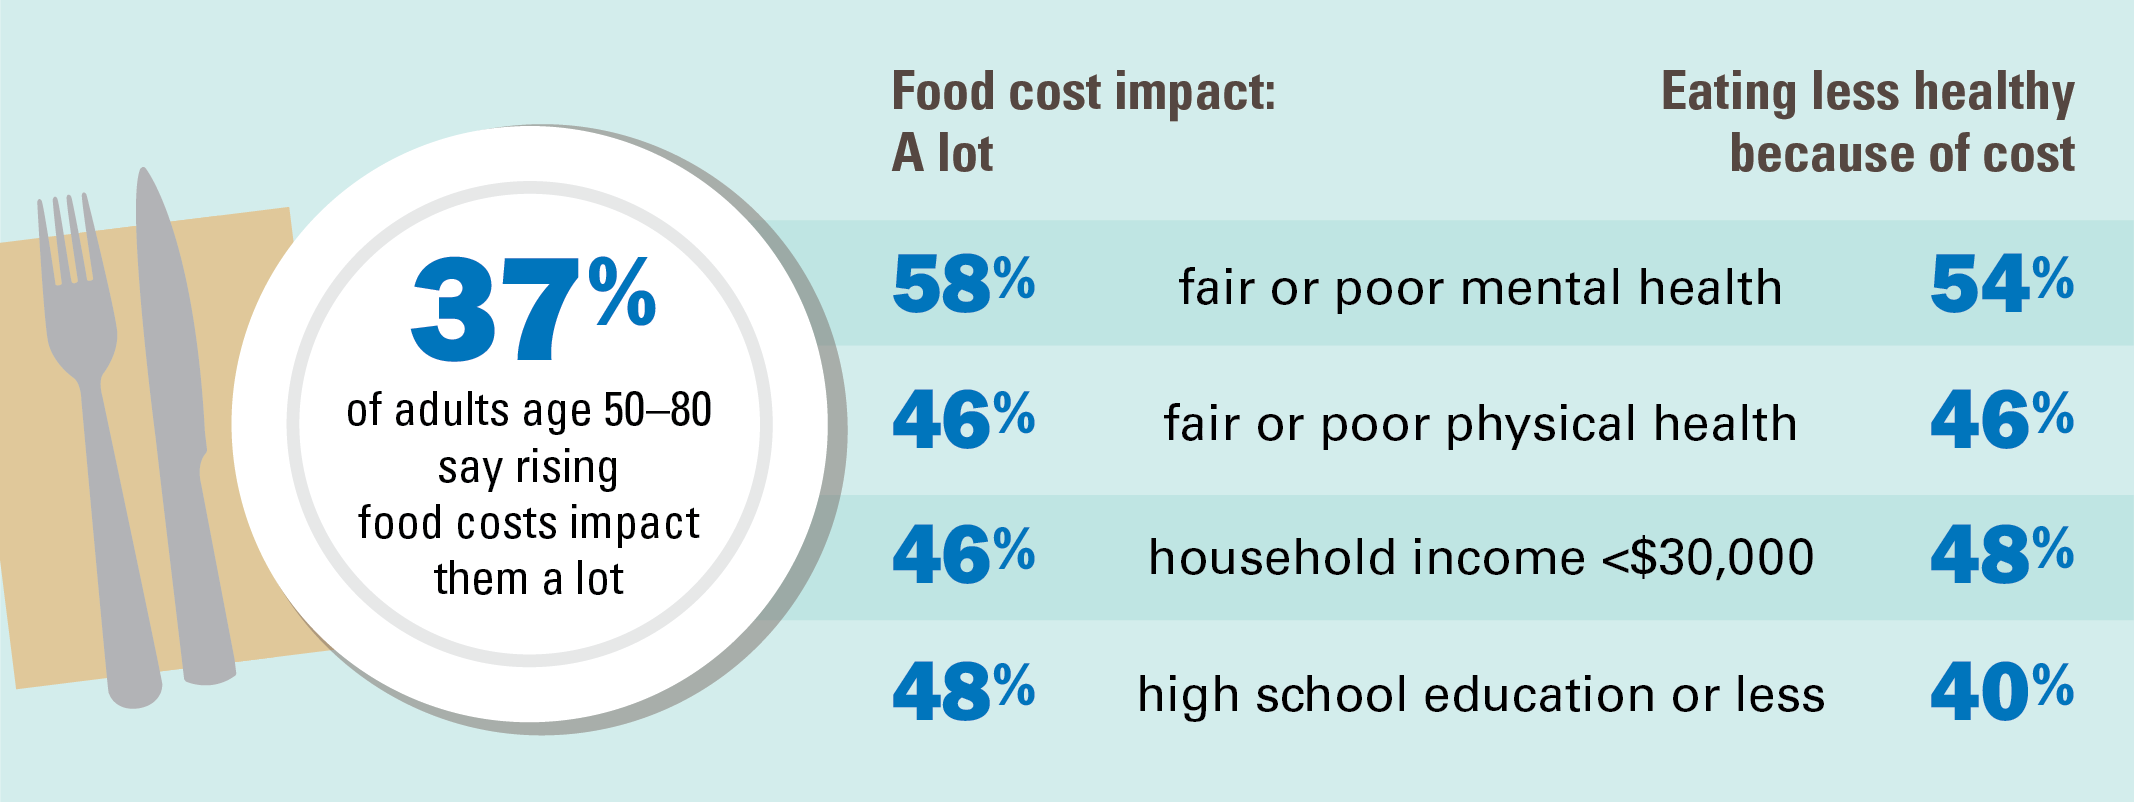 37% of adults age 50-80 say rising food costs impact them a lot